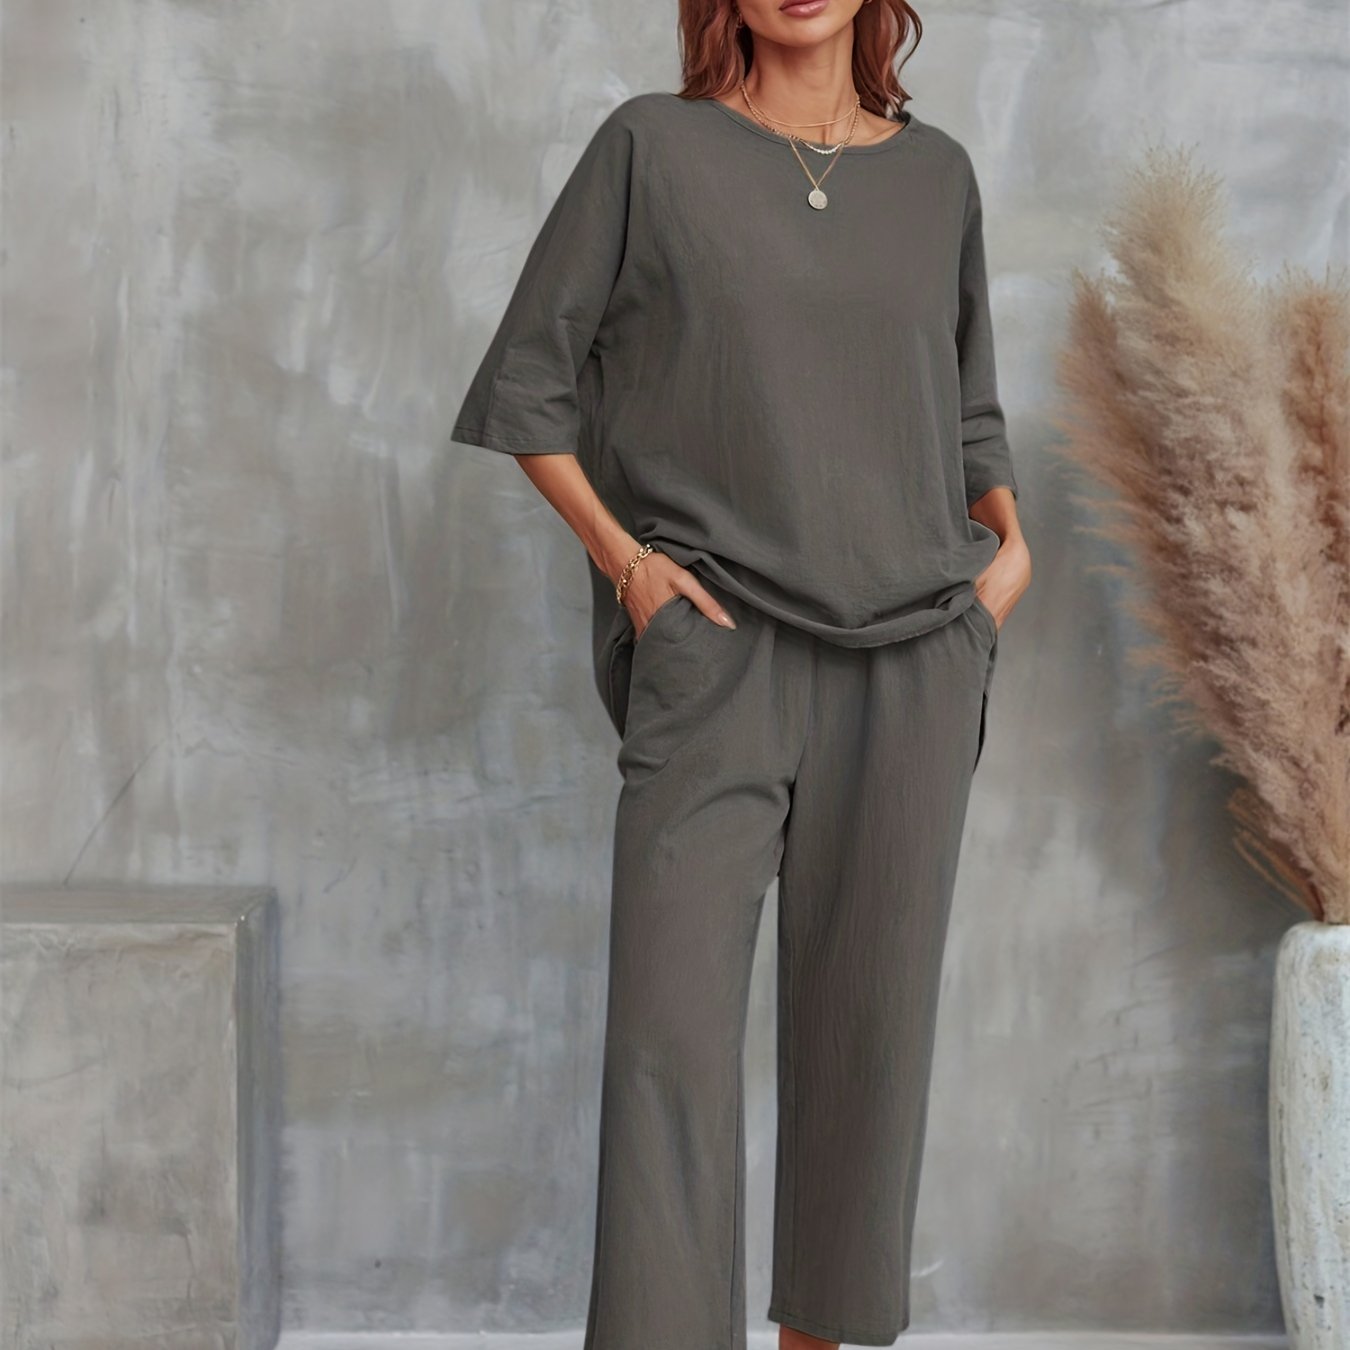 vlovelaw  Solid Casual Two-piece Set, Crew Neck Half Sleeve Tee & Wide Leg Pants Outfits, Women's Clothing